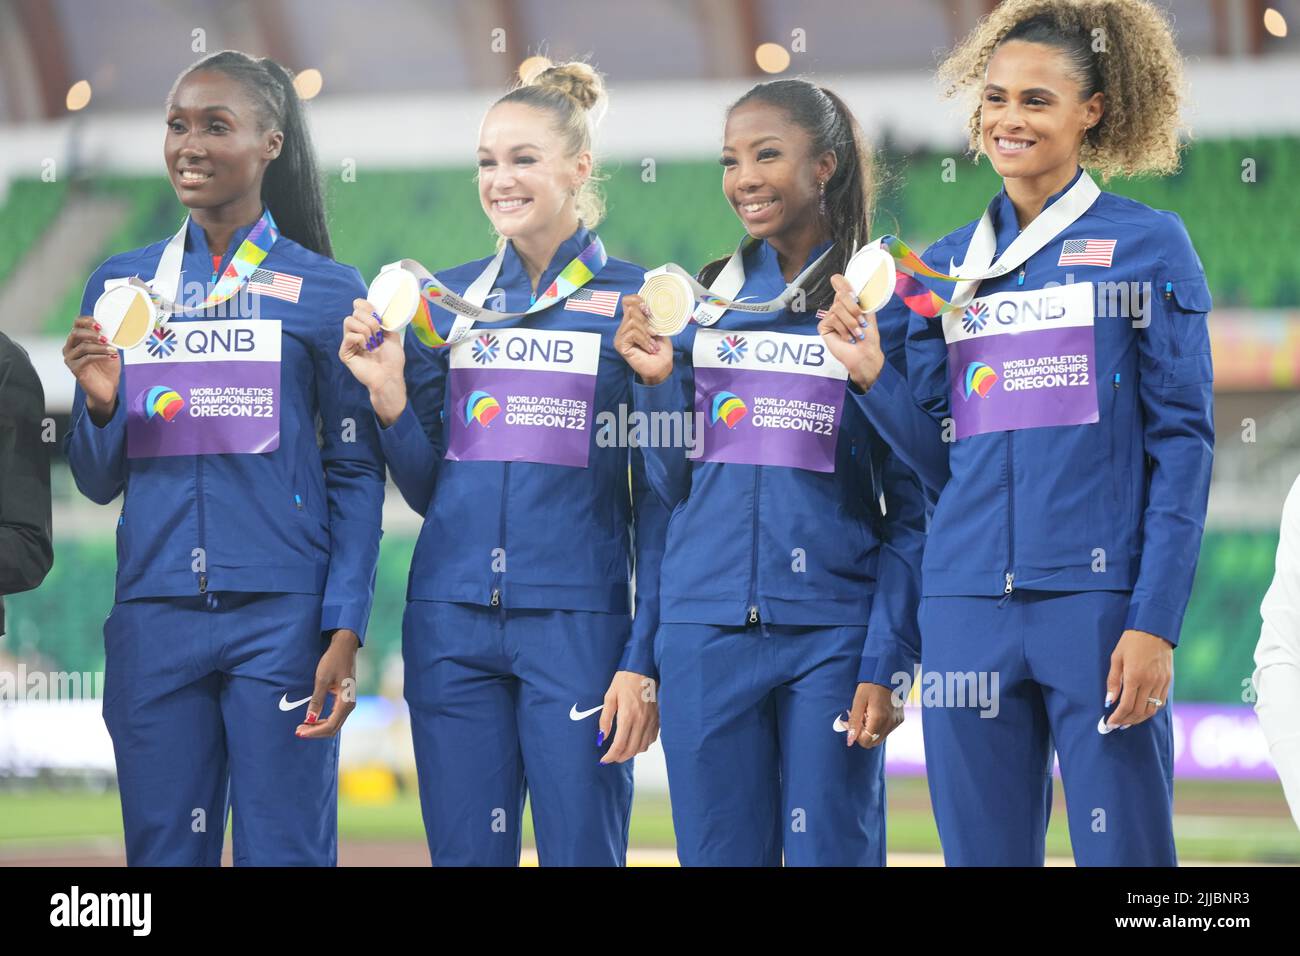 Eugene, USA. 24th July, 2022. Gold medalists Talitha Diggs, Abby Steiner, Britton Wilson and Sydney McLaughlin (L-R) of Team USA pose during the women's 4x400m relay awarding ceremony at the World Athletics Championships Oregon22 in Eugene, Oregon, the United States, July 24, 2022. Credit: Wu Xiaoling/Xinhua/Alamy Live News Stock Photo